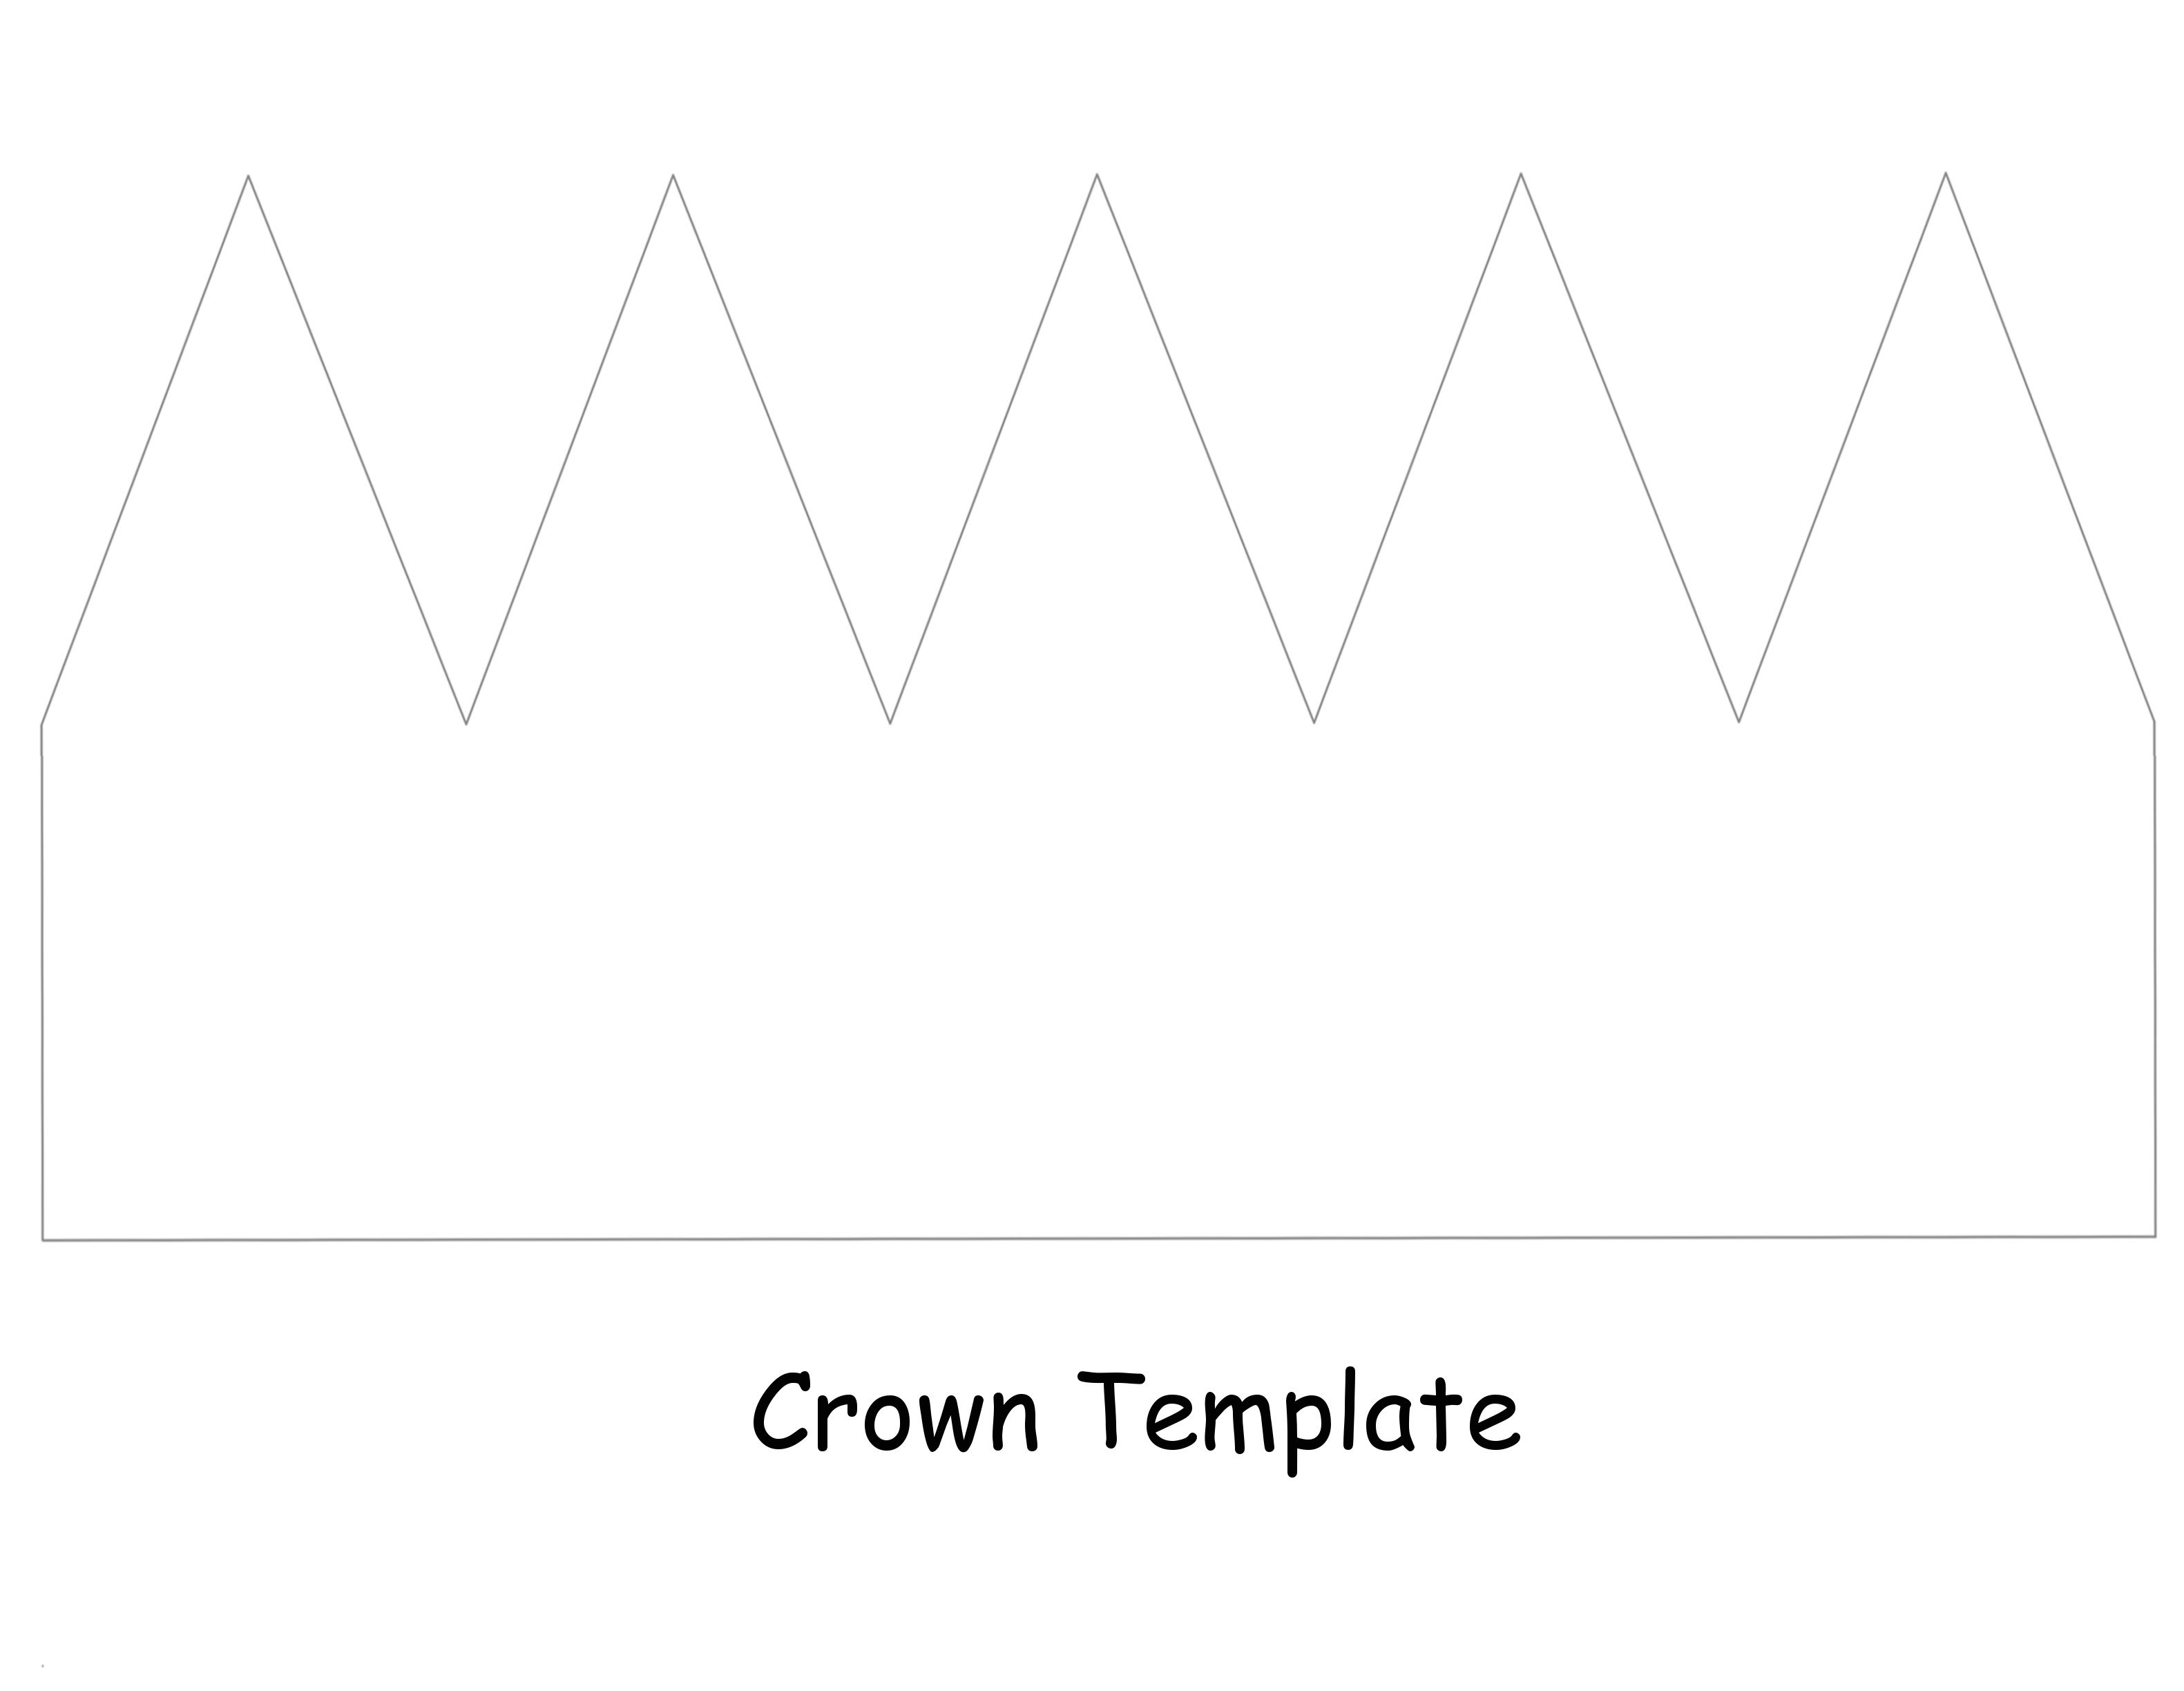 Crown Template for King Kings and Queens Of Miami – Diy Project Crowns and the